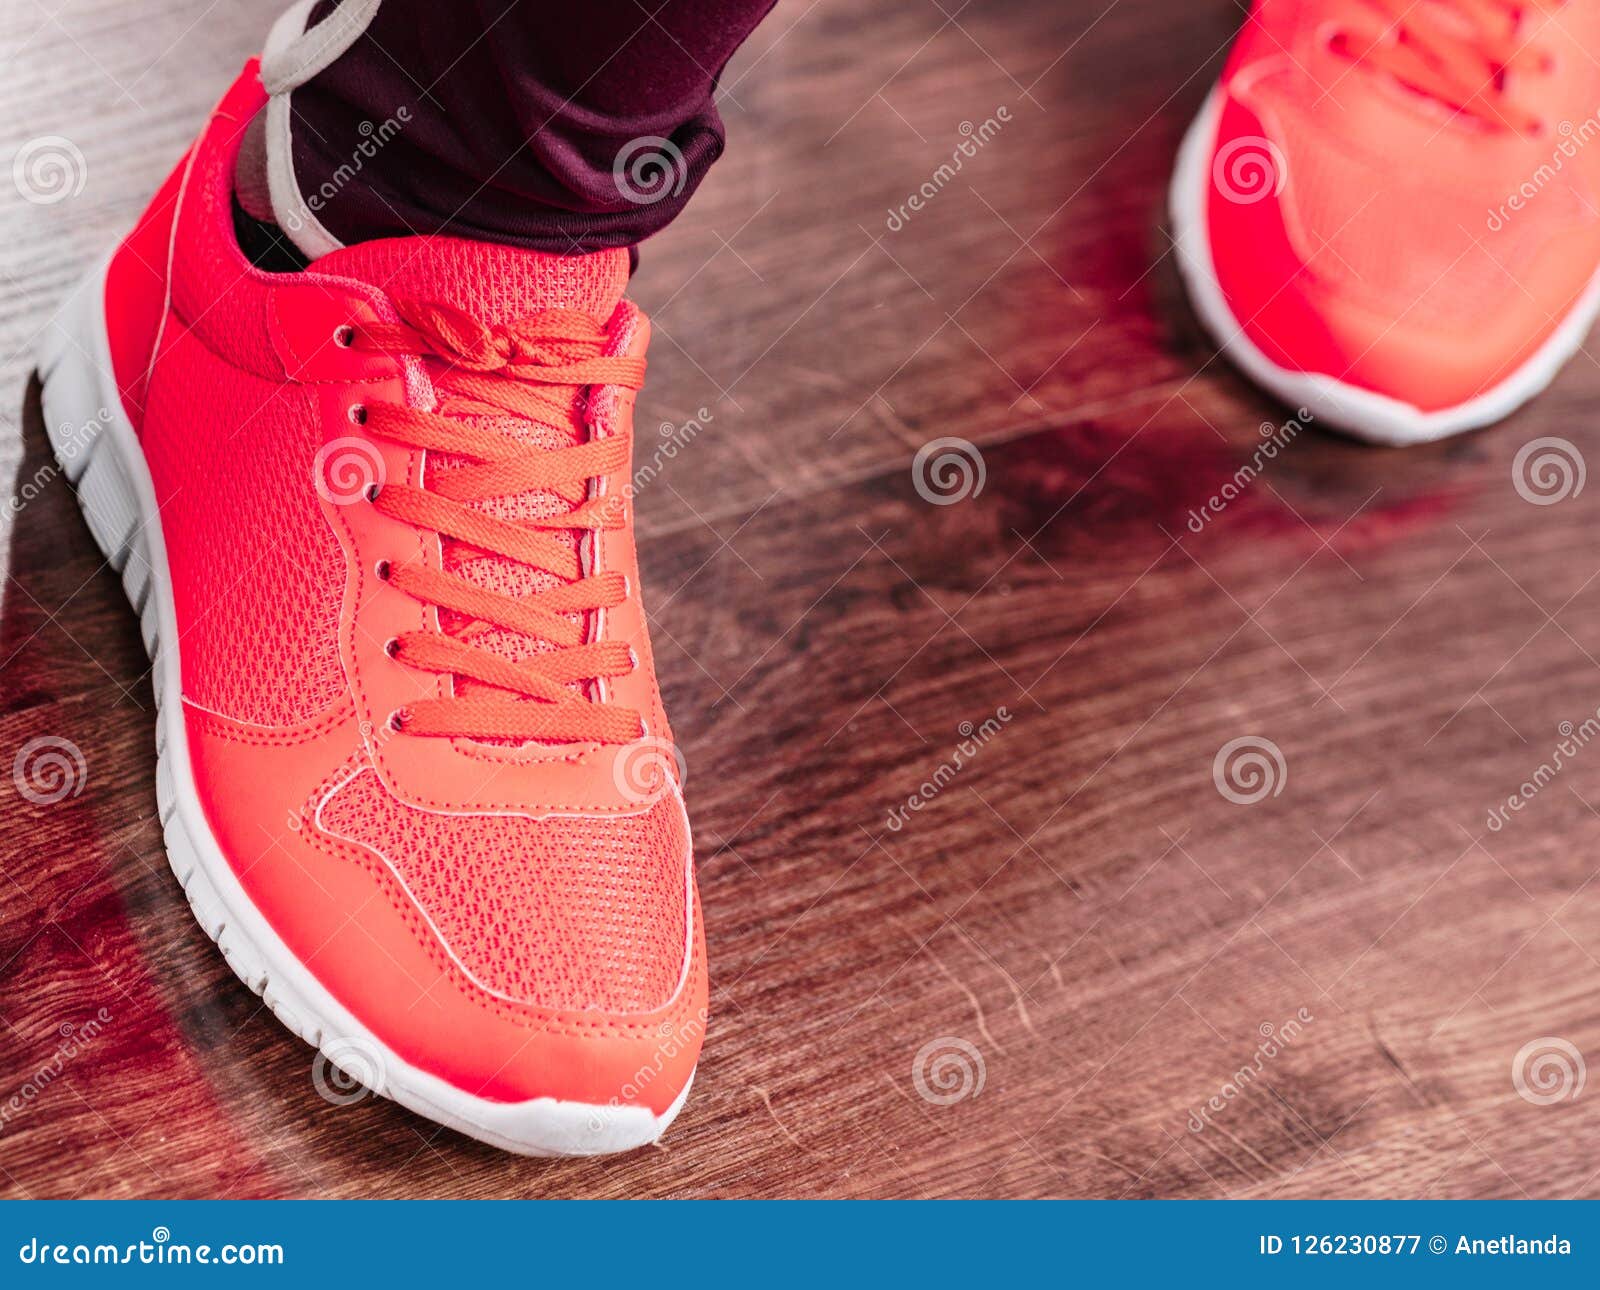 Woman Wearing Sportswear Trainers Shoes Stock Image - Image of exercise ...